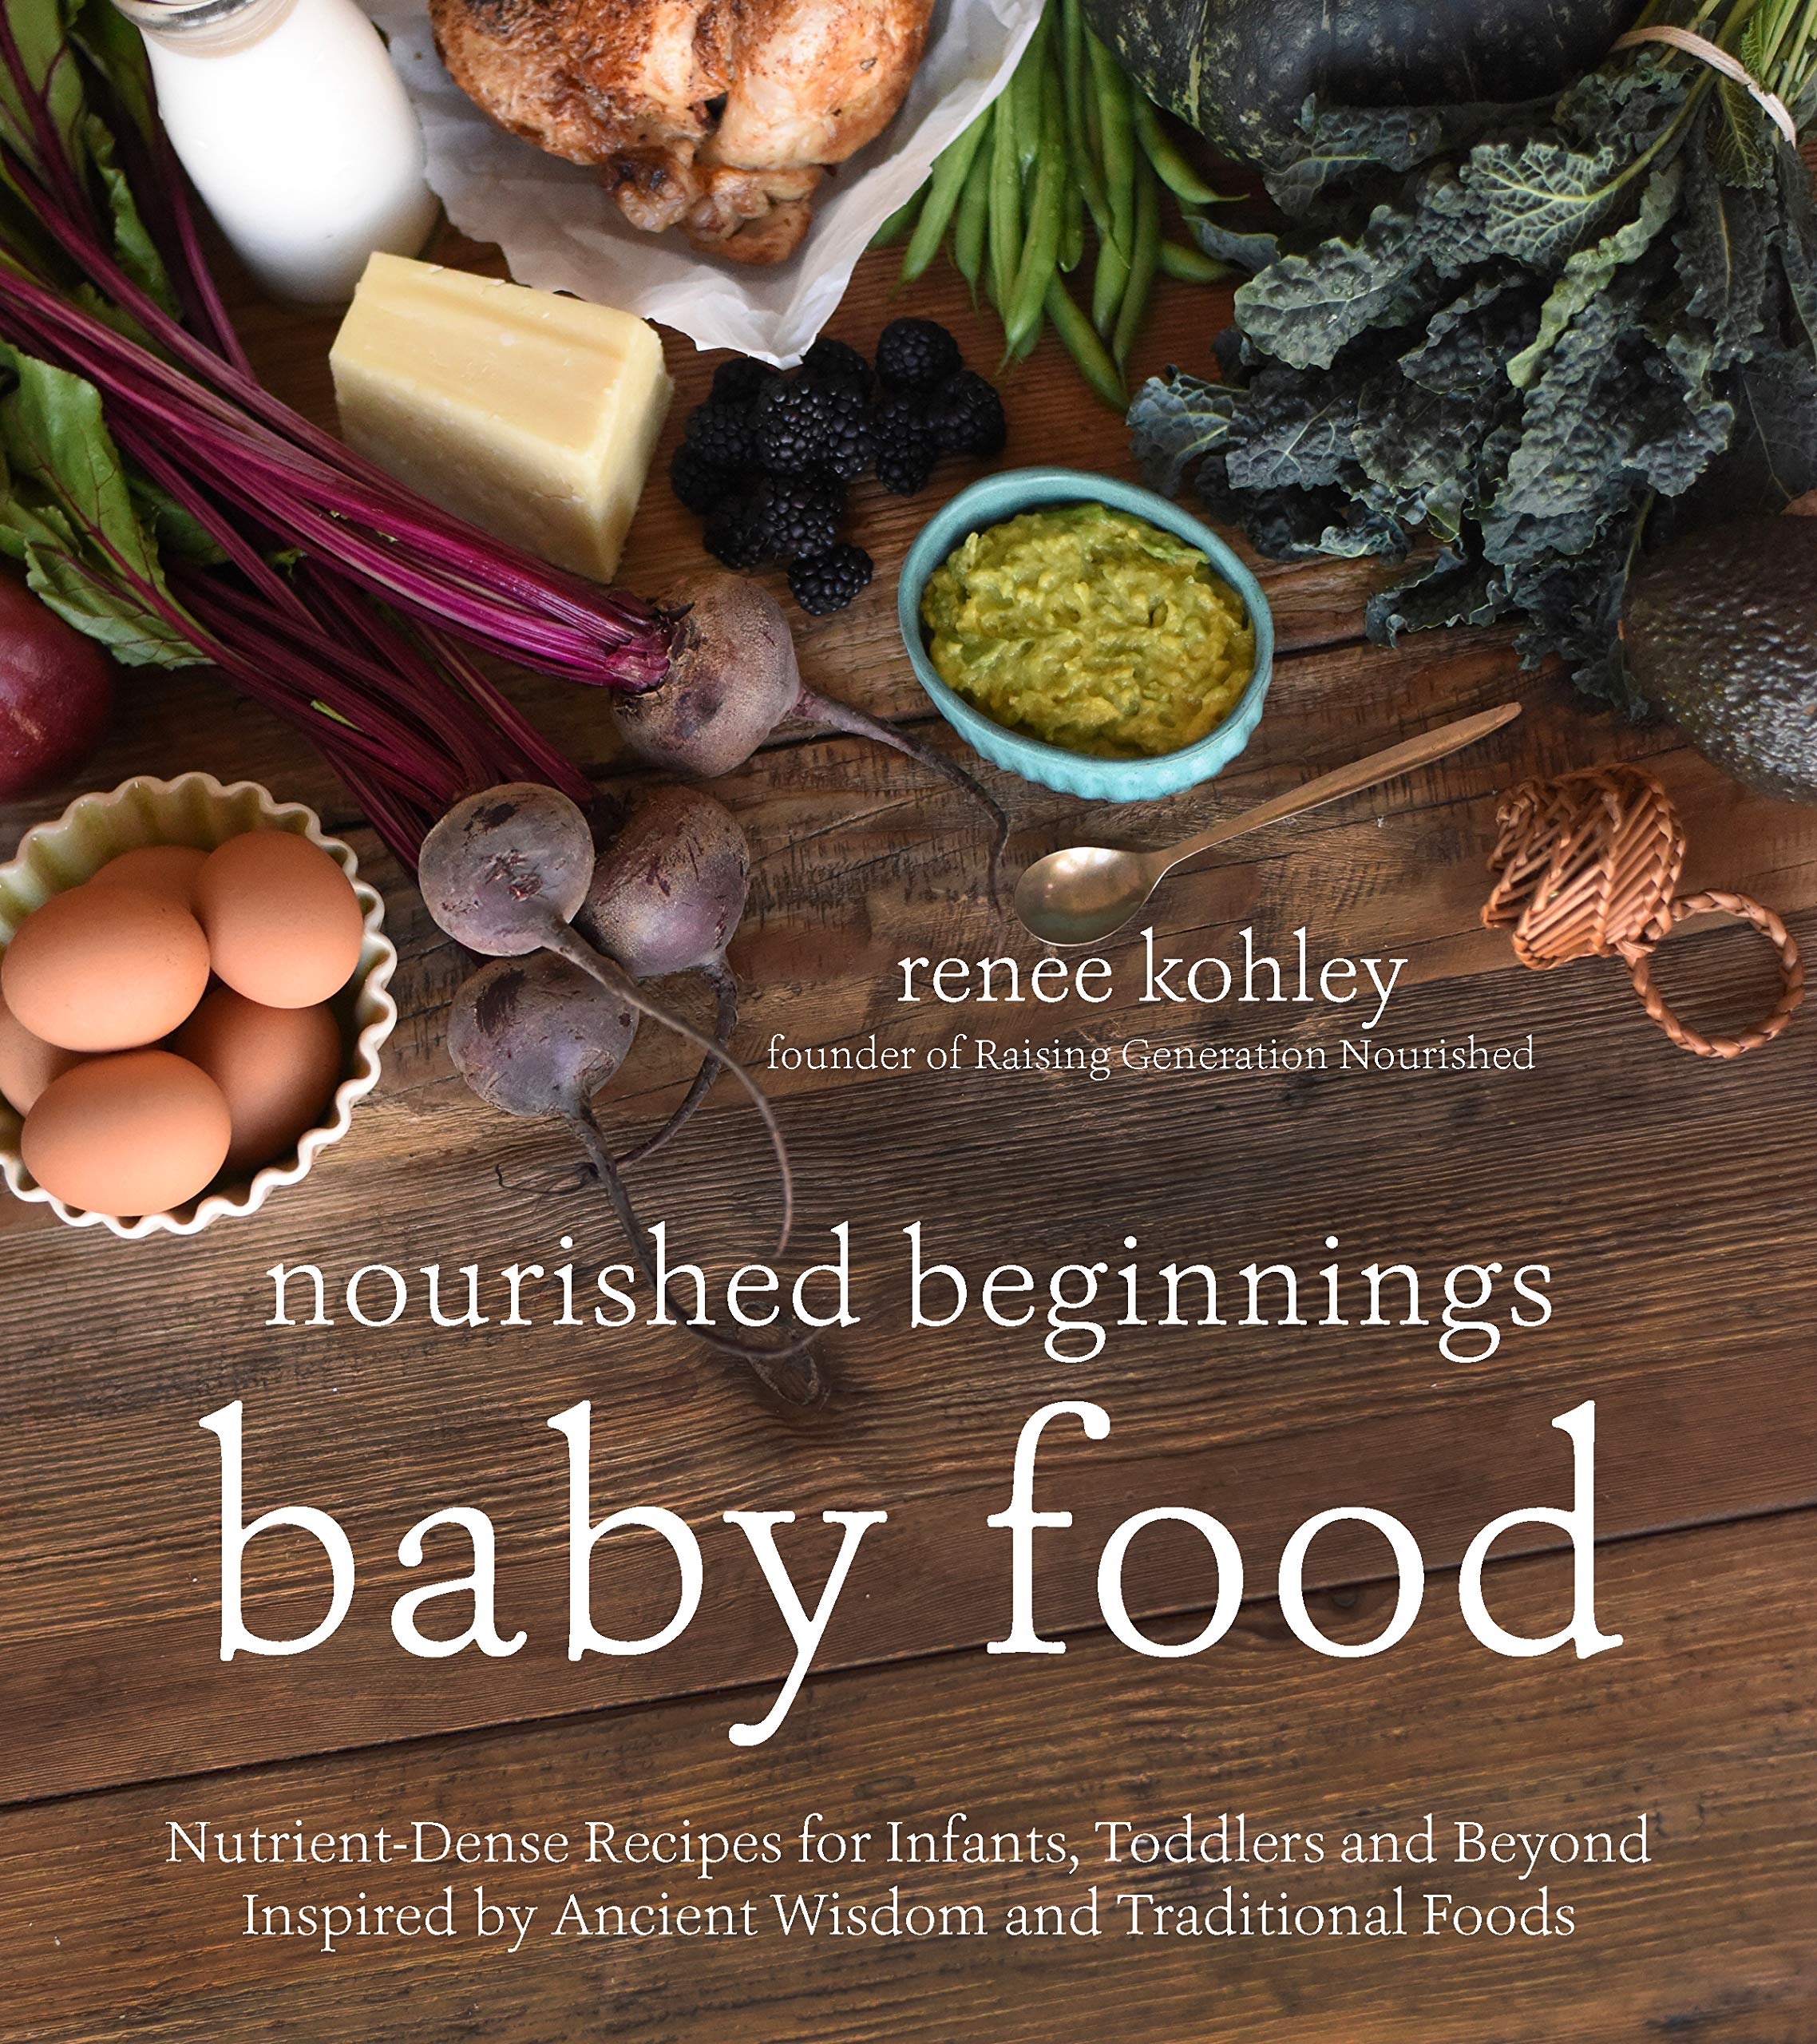 Nourished Beginnings Baby Food: Nutrient-Dense Recipes for Infants, Toddlers and Beyond Inspired by Ancient Wisdom and Traditional Foods (Renee Kohley)